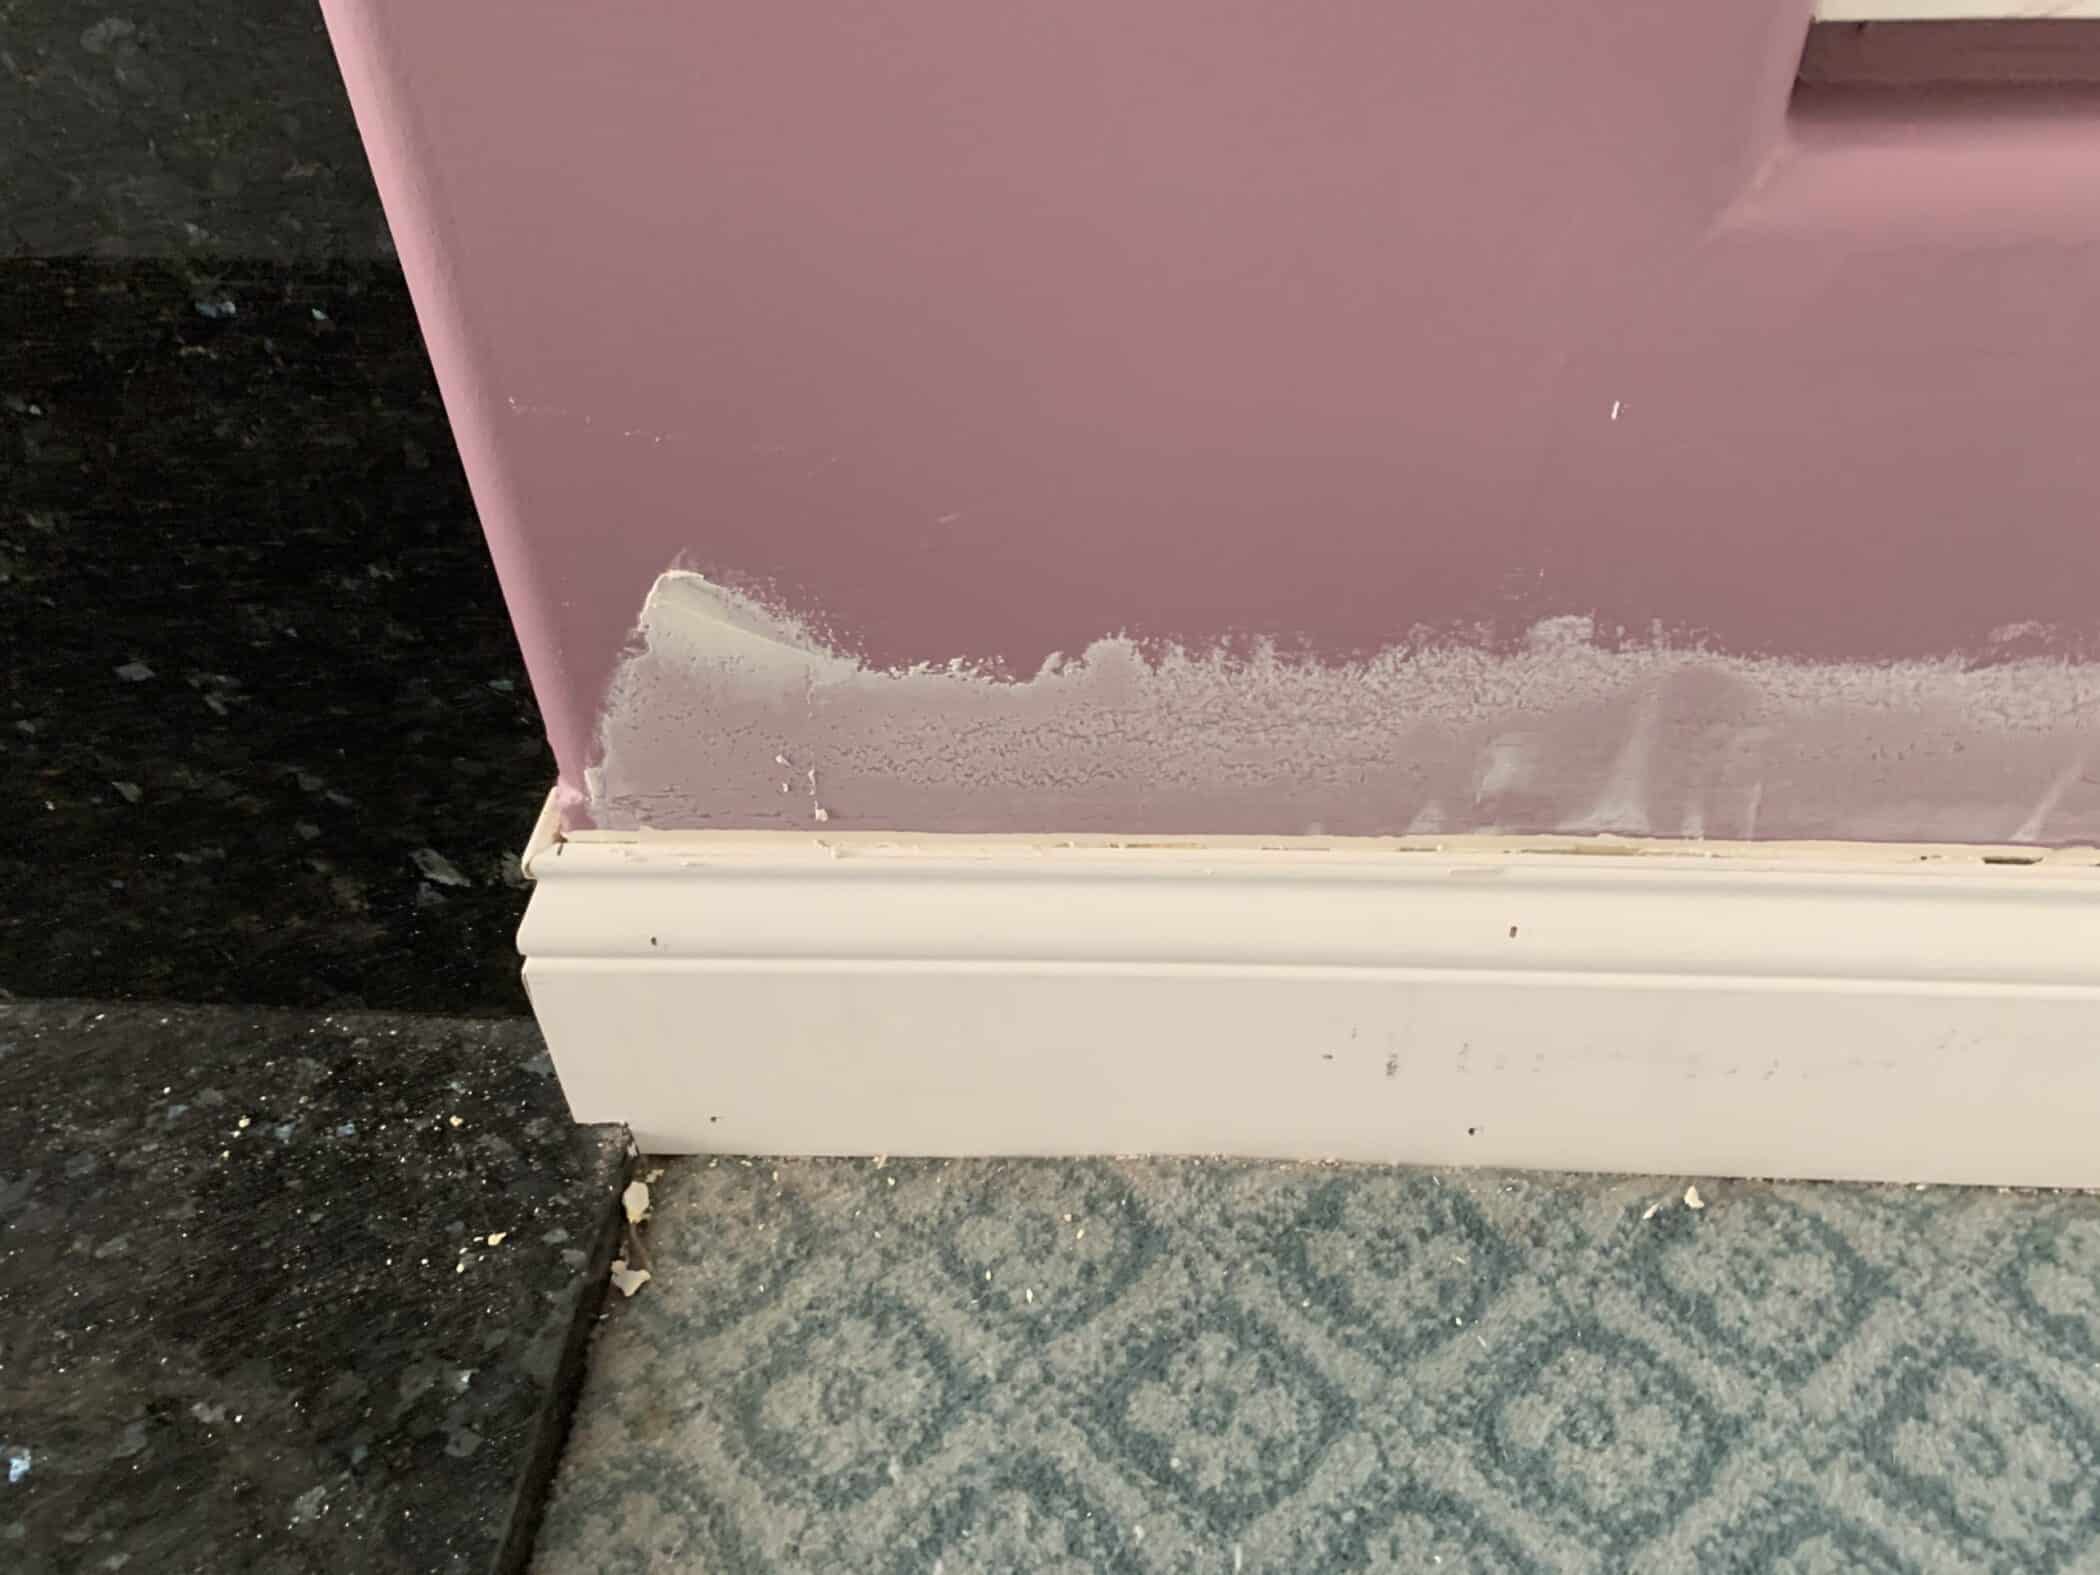 drywall damage - how to get your walls ready for wallpaper